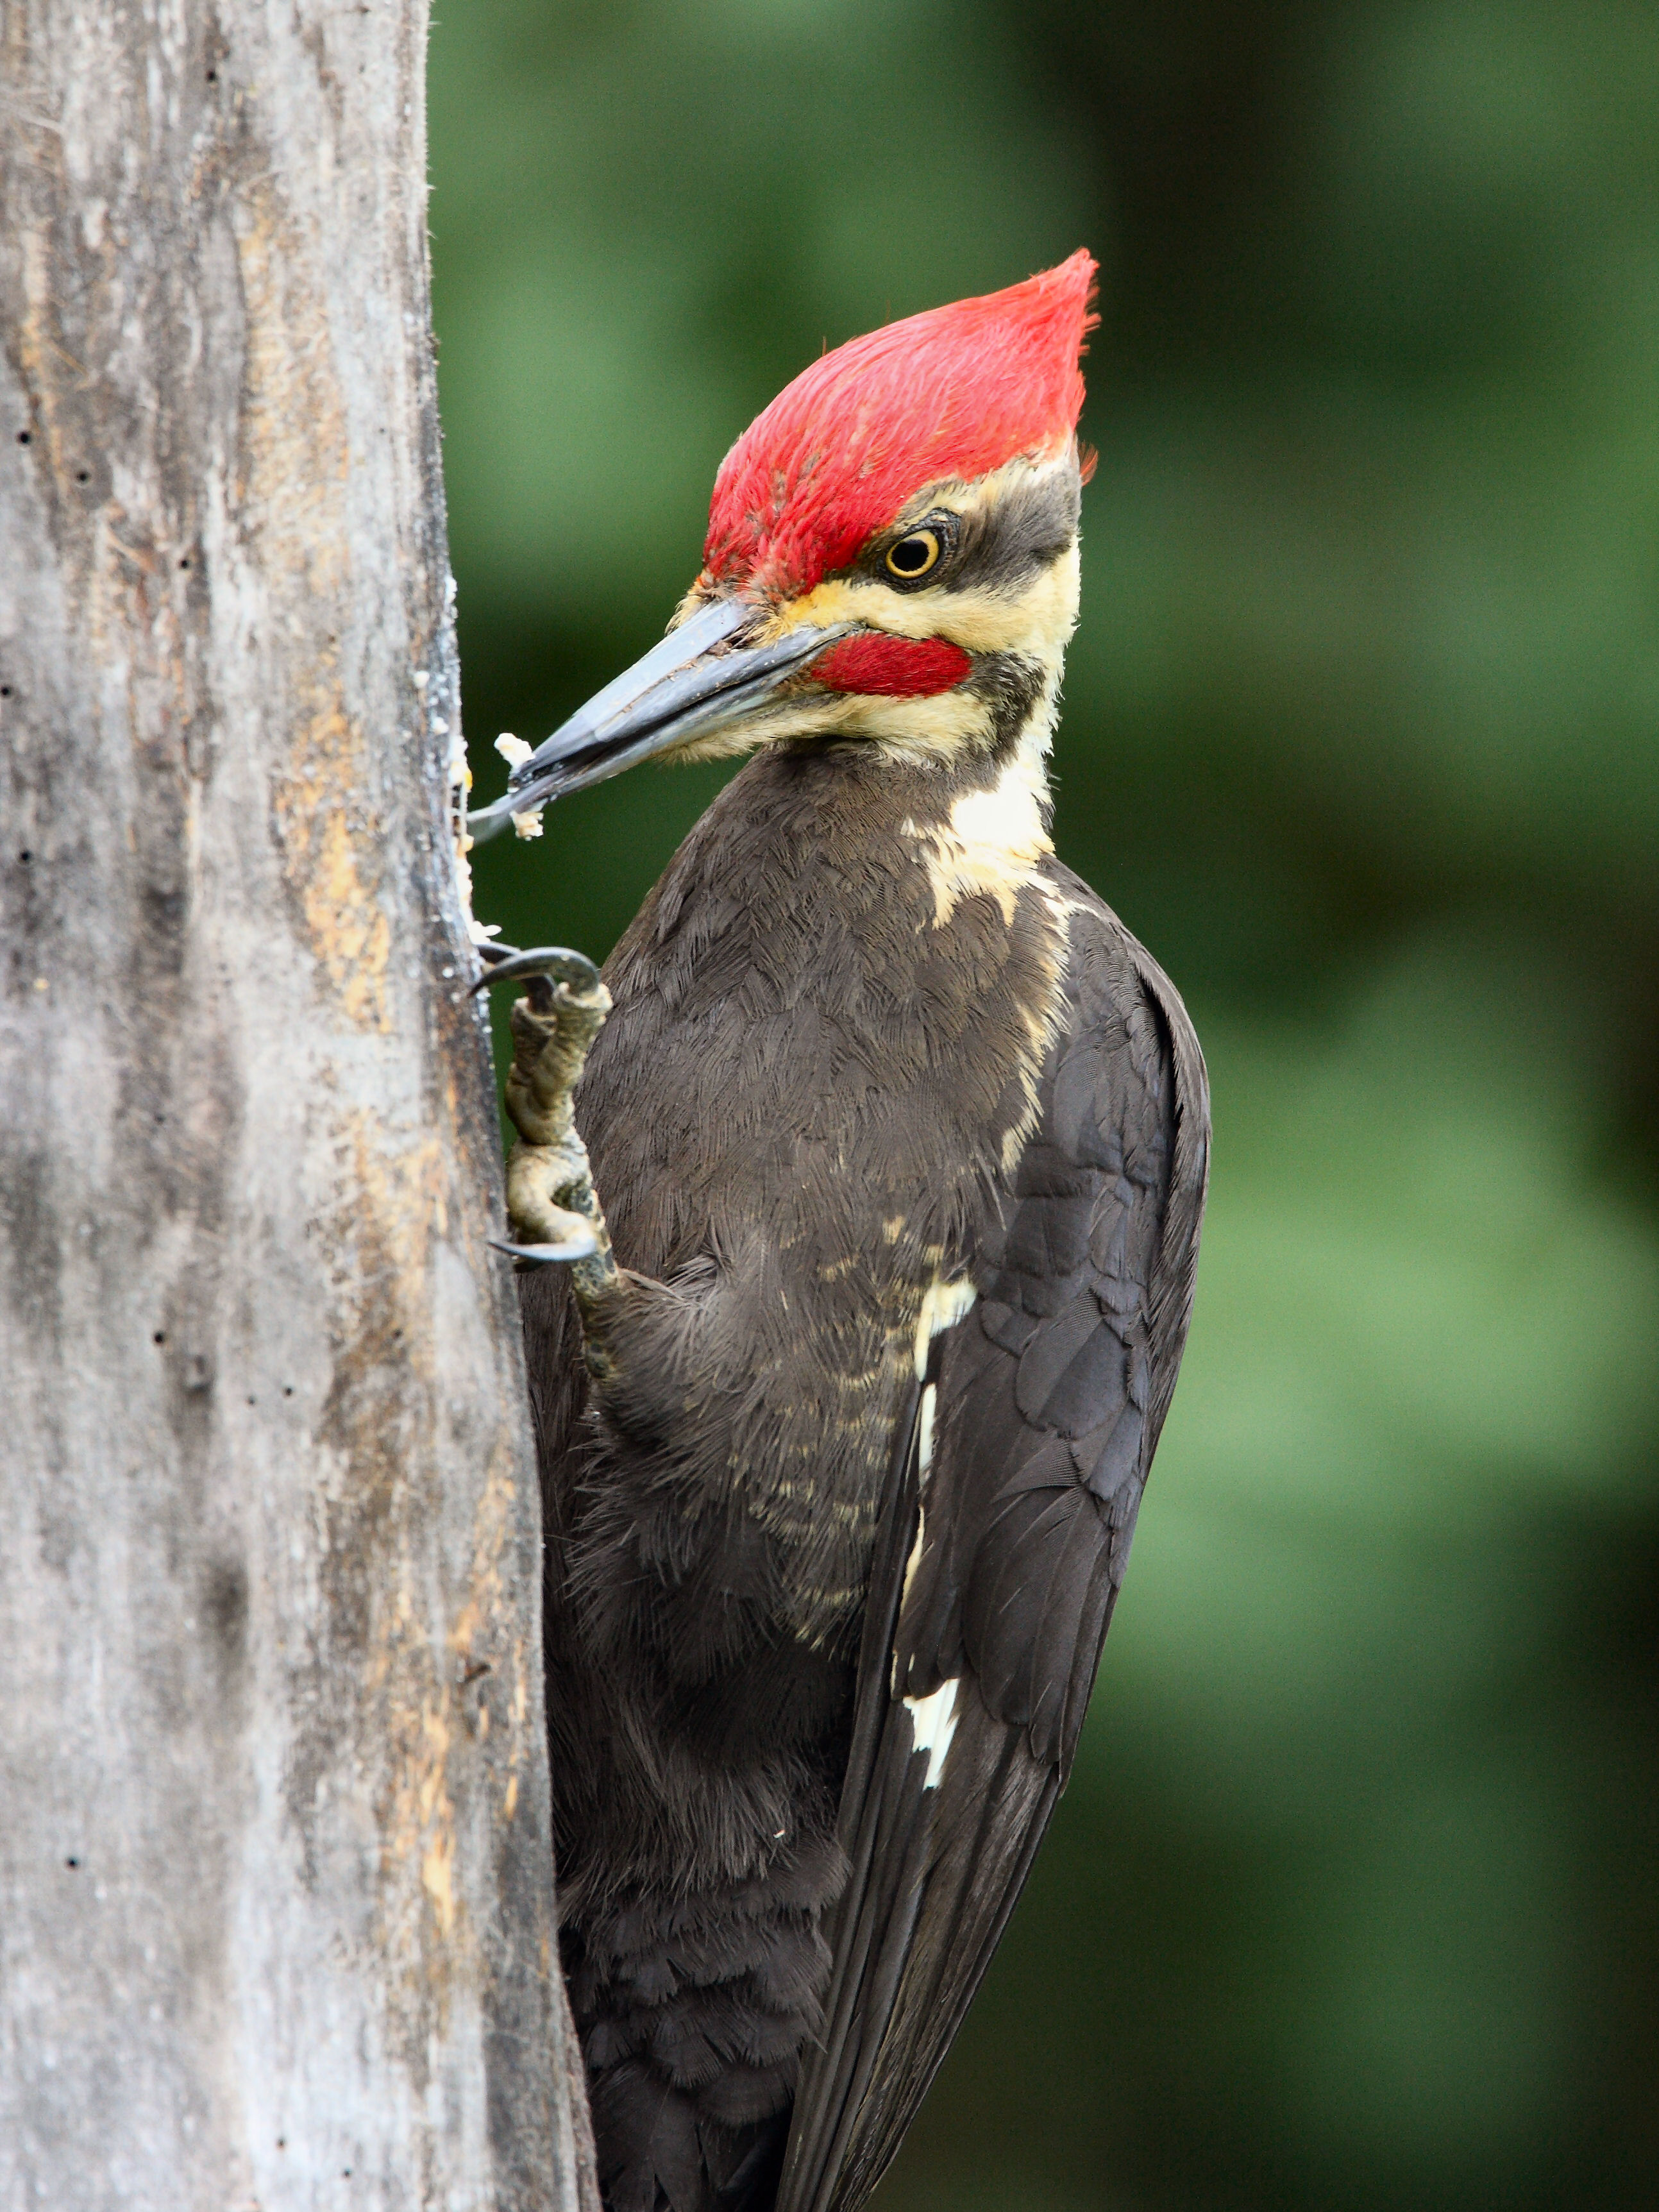 How To Deal With Problem Woodpecker In New Hampshire Wildlifehelp Org,Crock Pot Tofu Chili